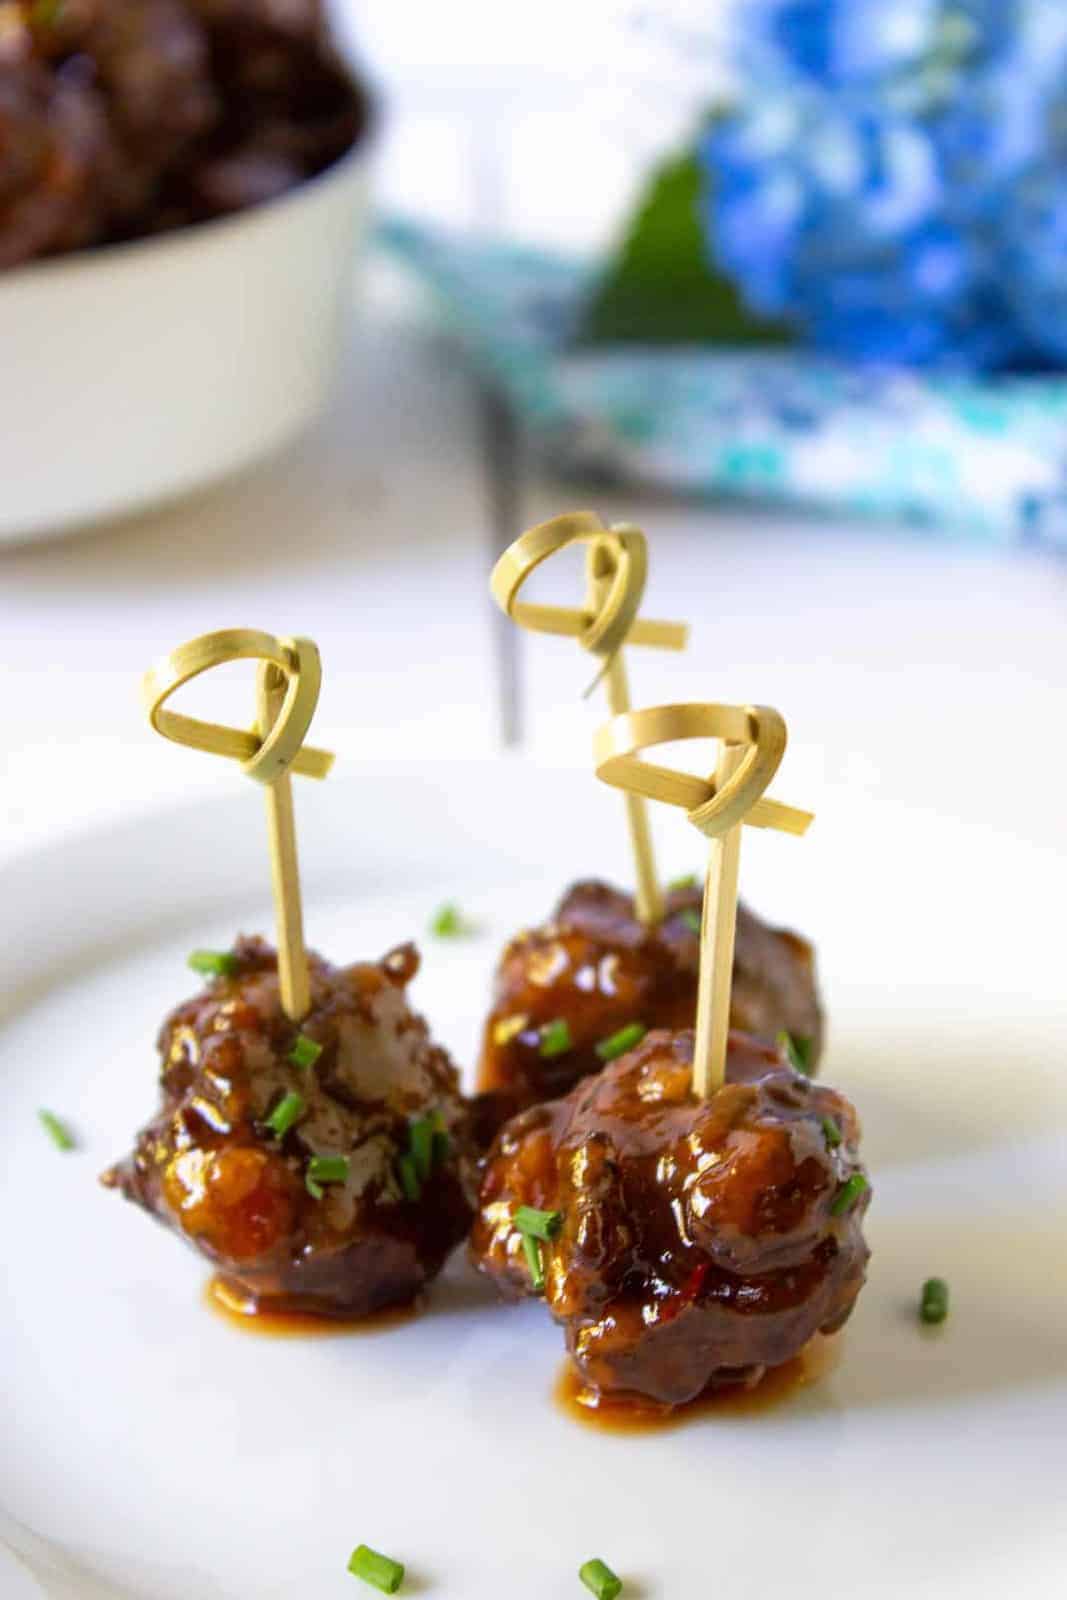 Cocktail meatballs are perfect for any party or gathering.